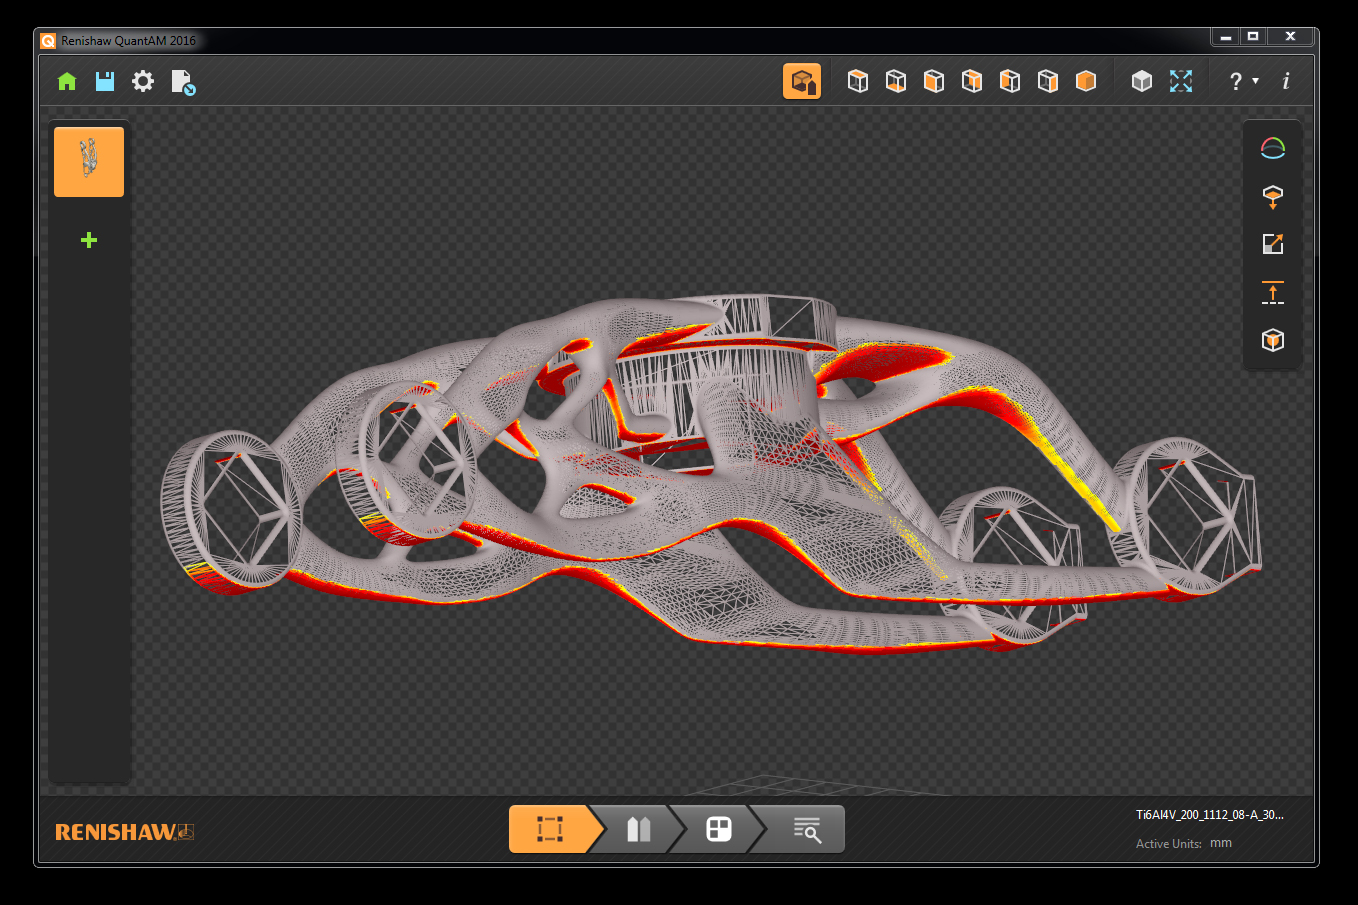 Dassault Systèmes develops 3D modelling, simulation and industrial operations software.